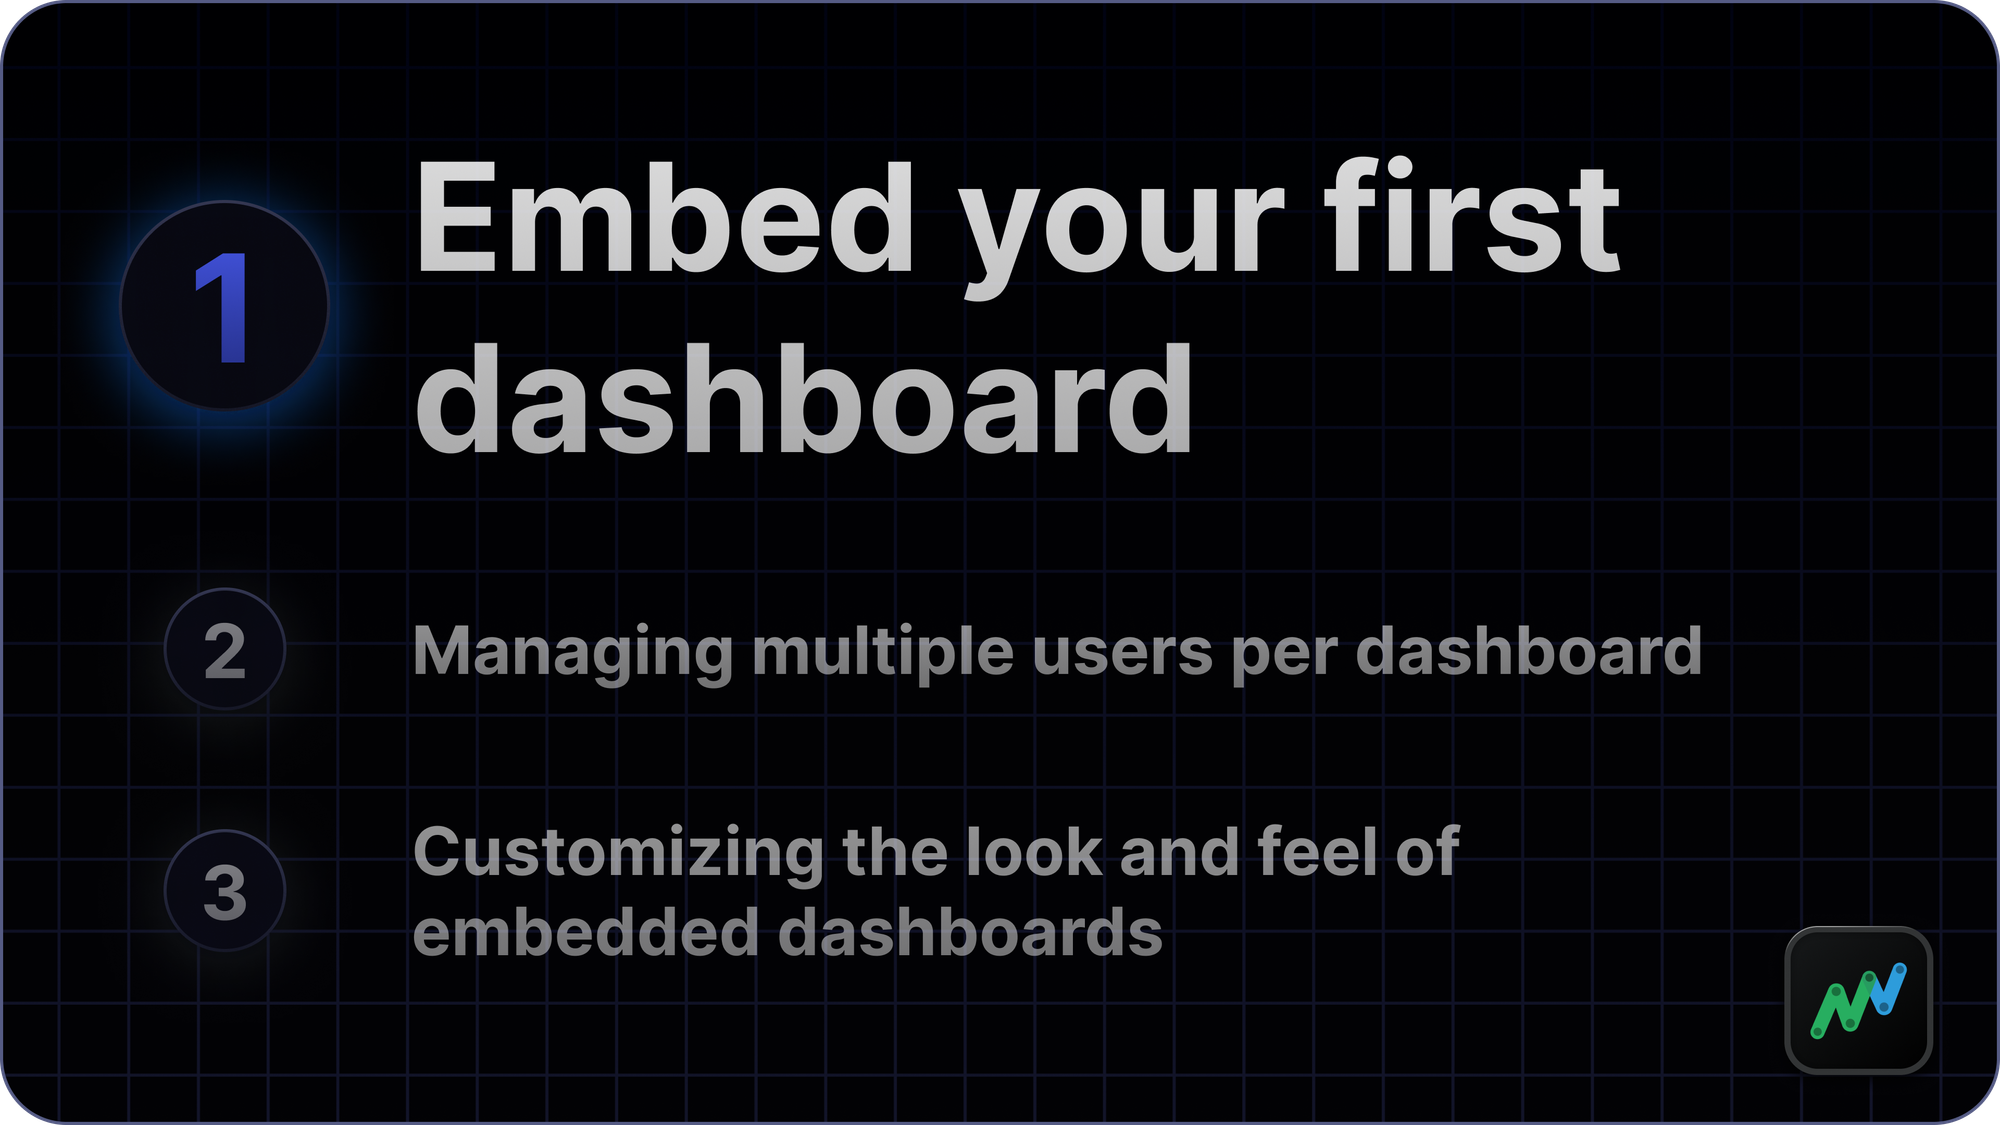 Embedding your first dashboard